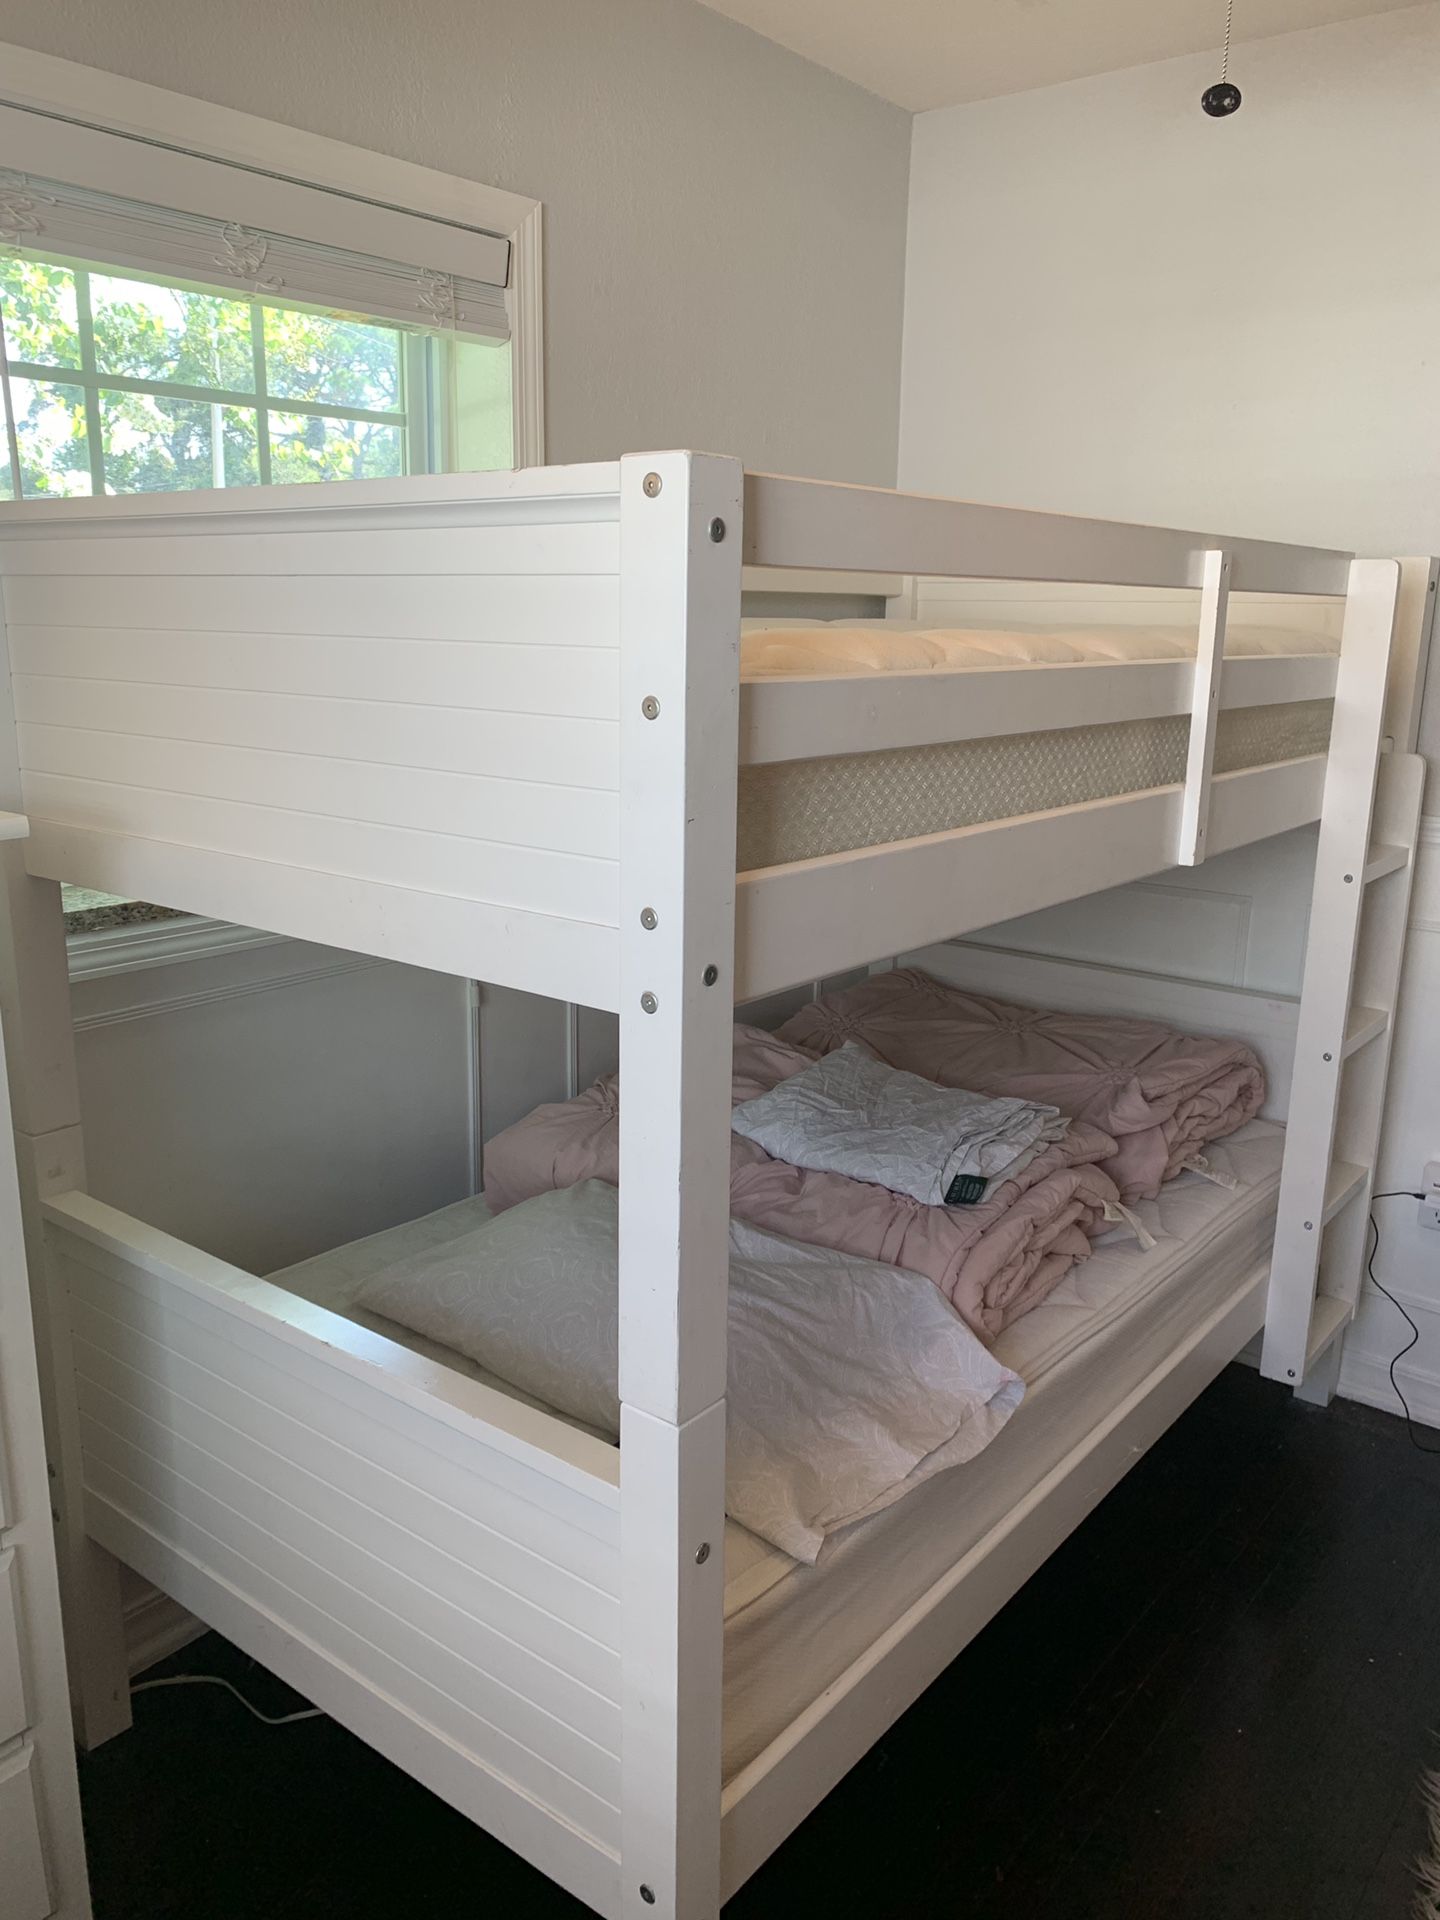 Bunk beds with mattresses, comforters and sheets.